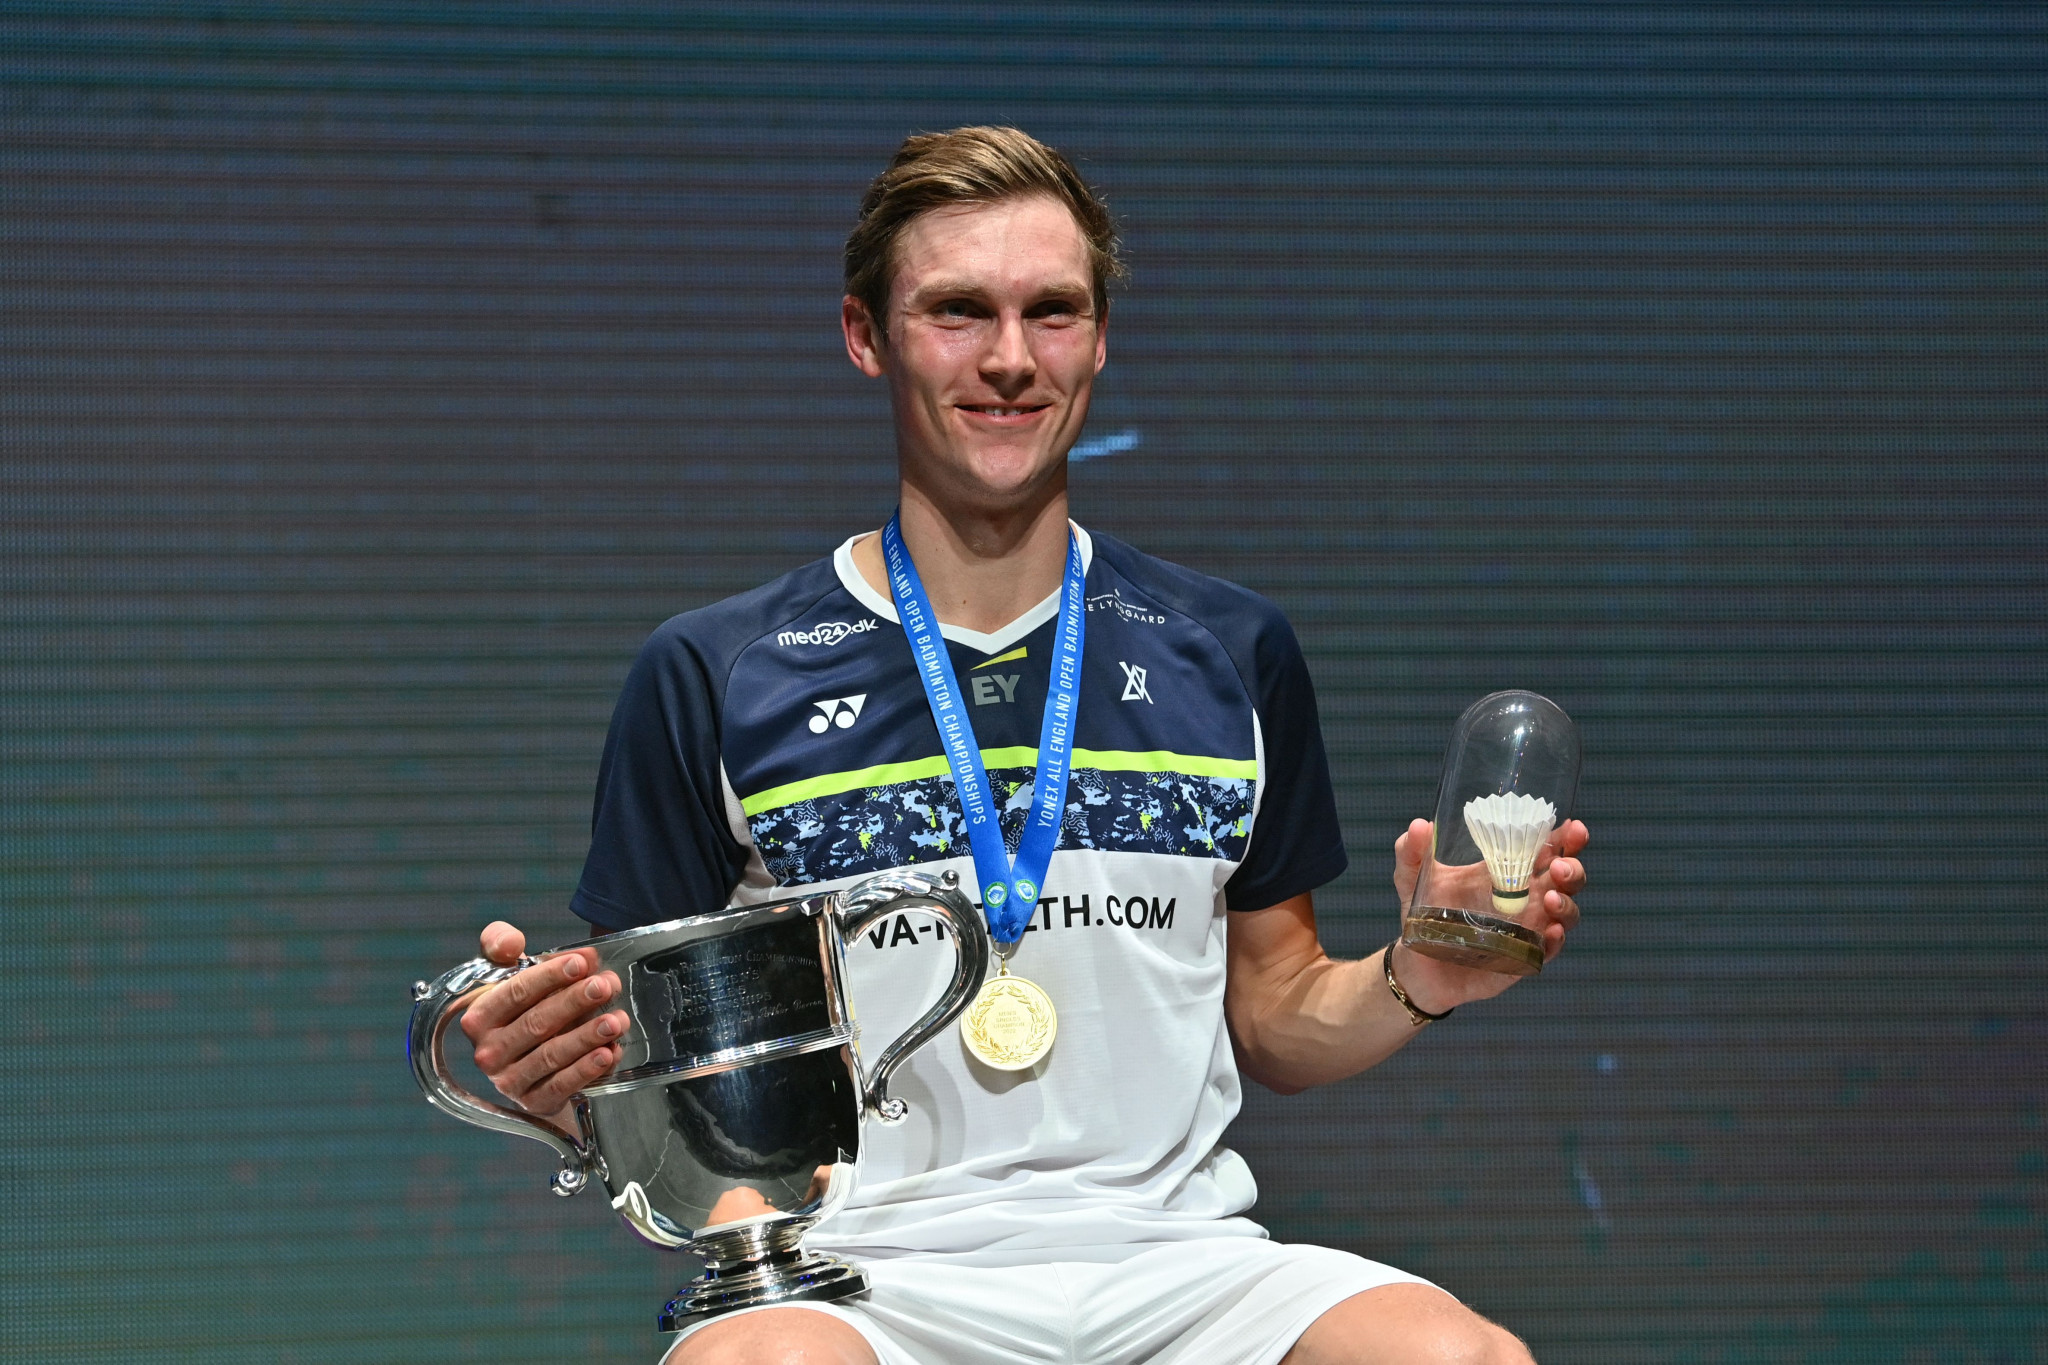 Axelsen claims second All England Open Badminton Championships title